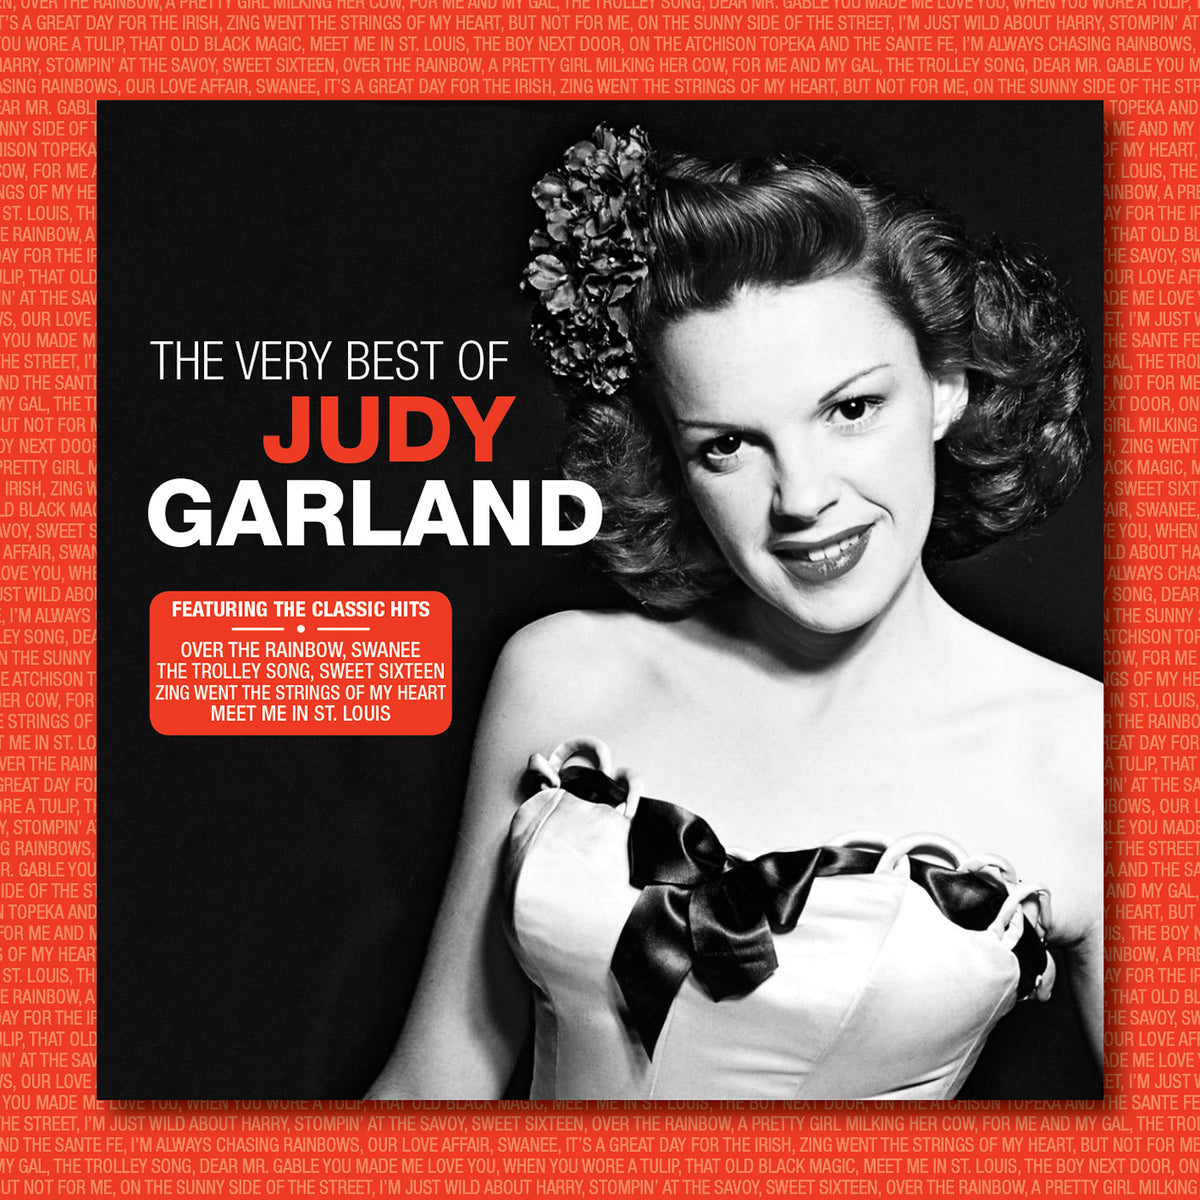 JUDY GARLAND - THE VERY BEST OF